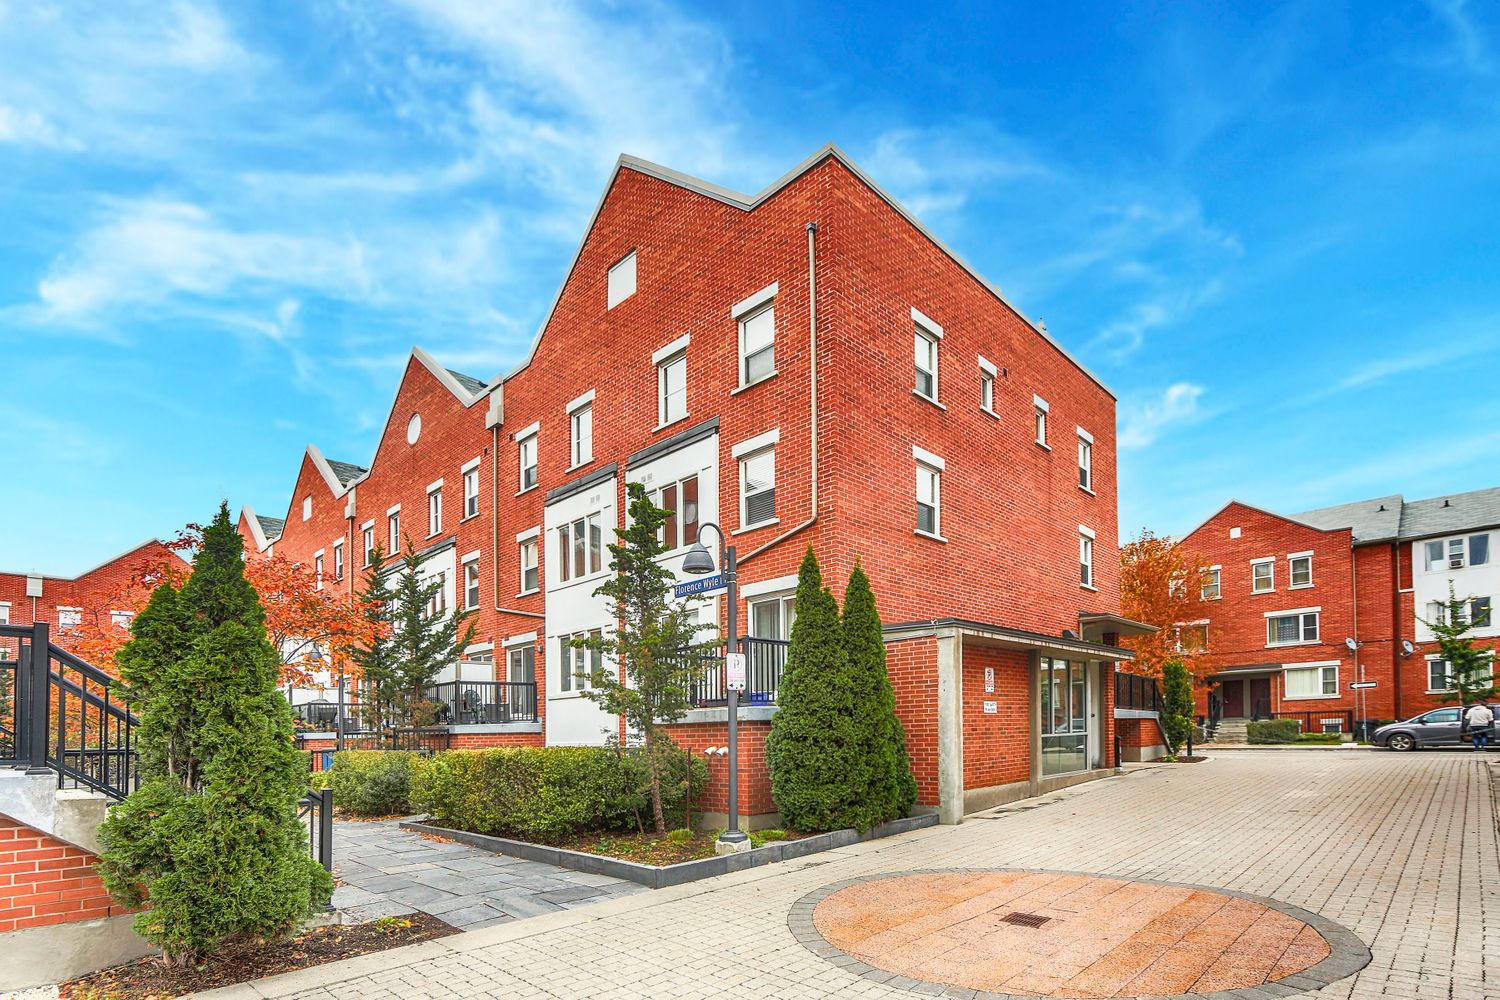 817-825 Dundas Street E. Rivertowne Townhomes is located in  East End, Toronto - image #1 of 5